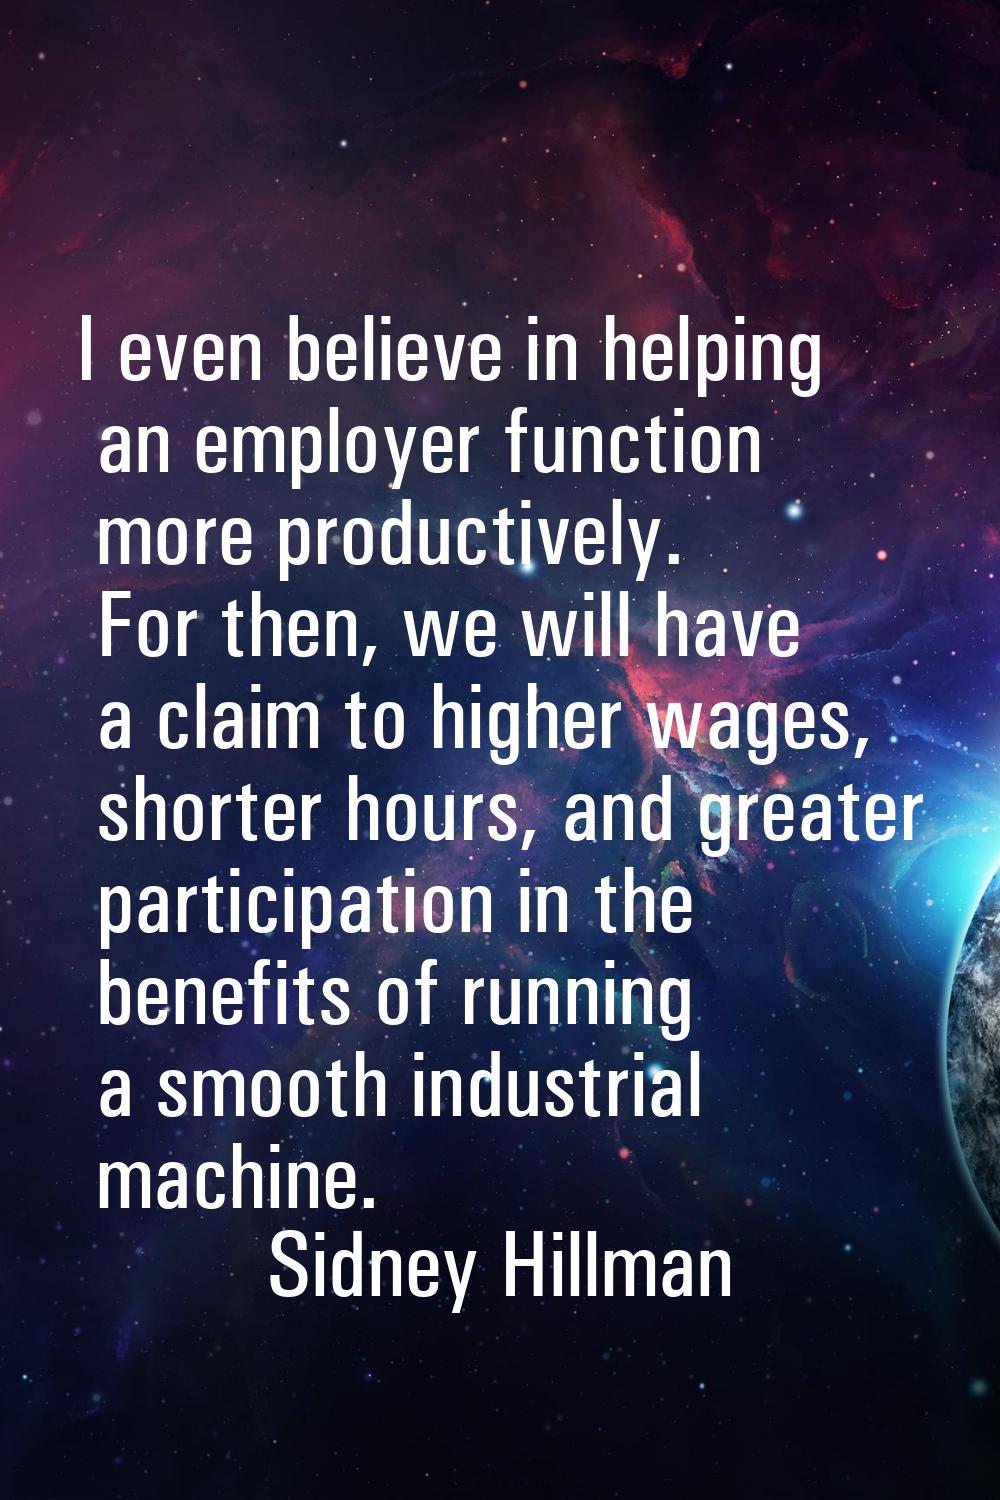 I even believe in helping an employer function more productively. For then, we will have a claim to